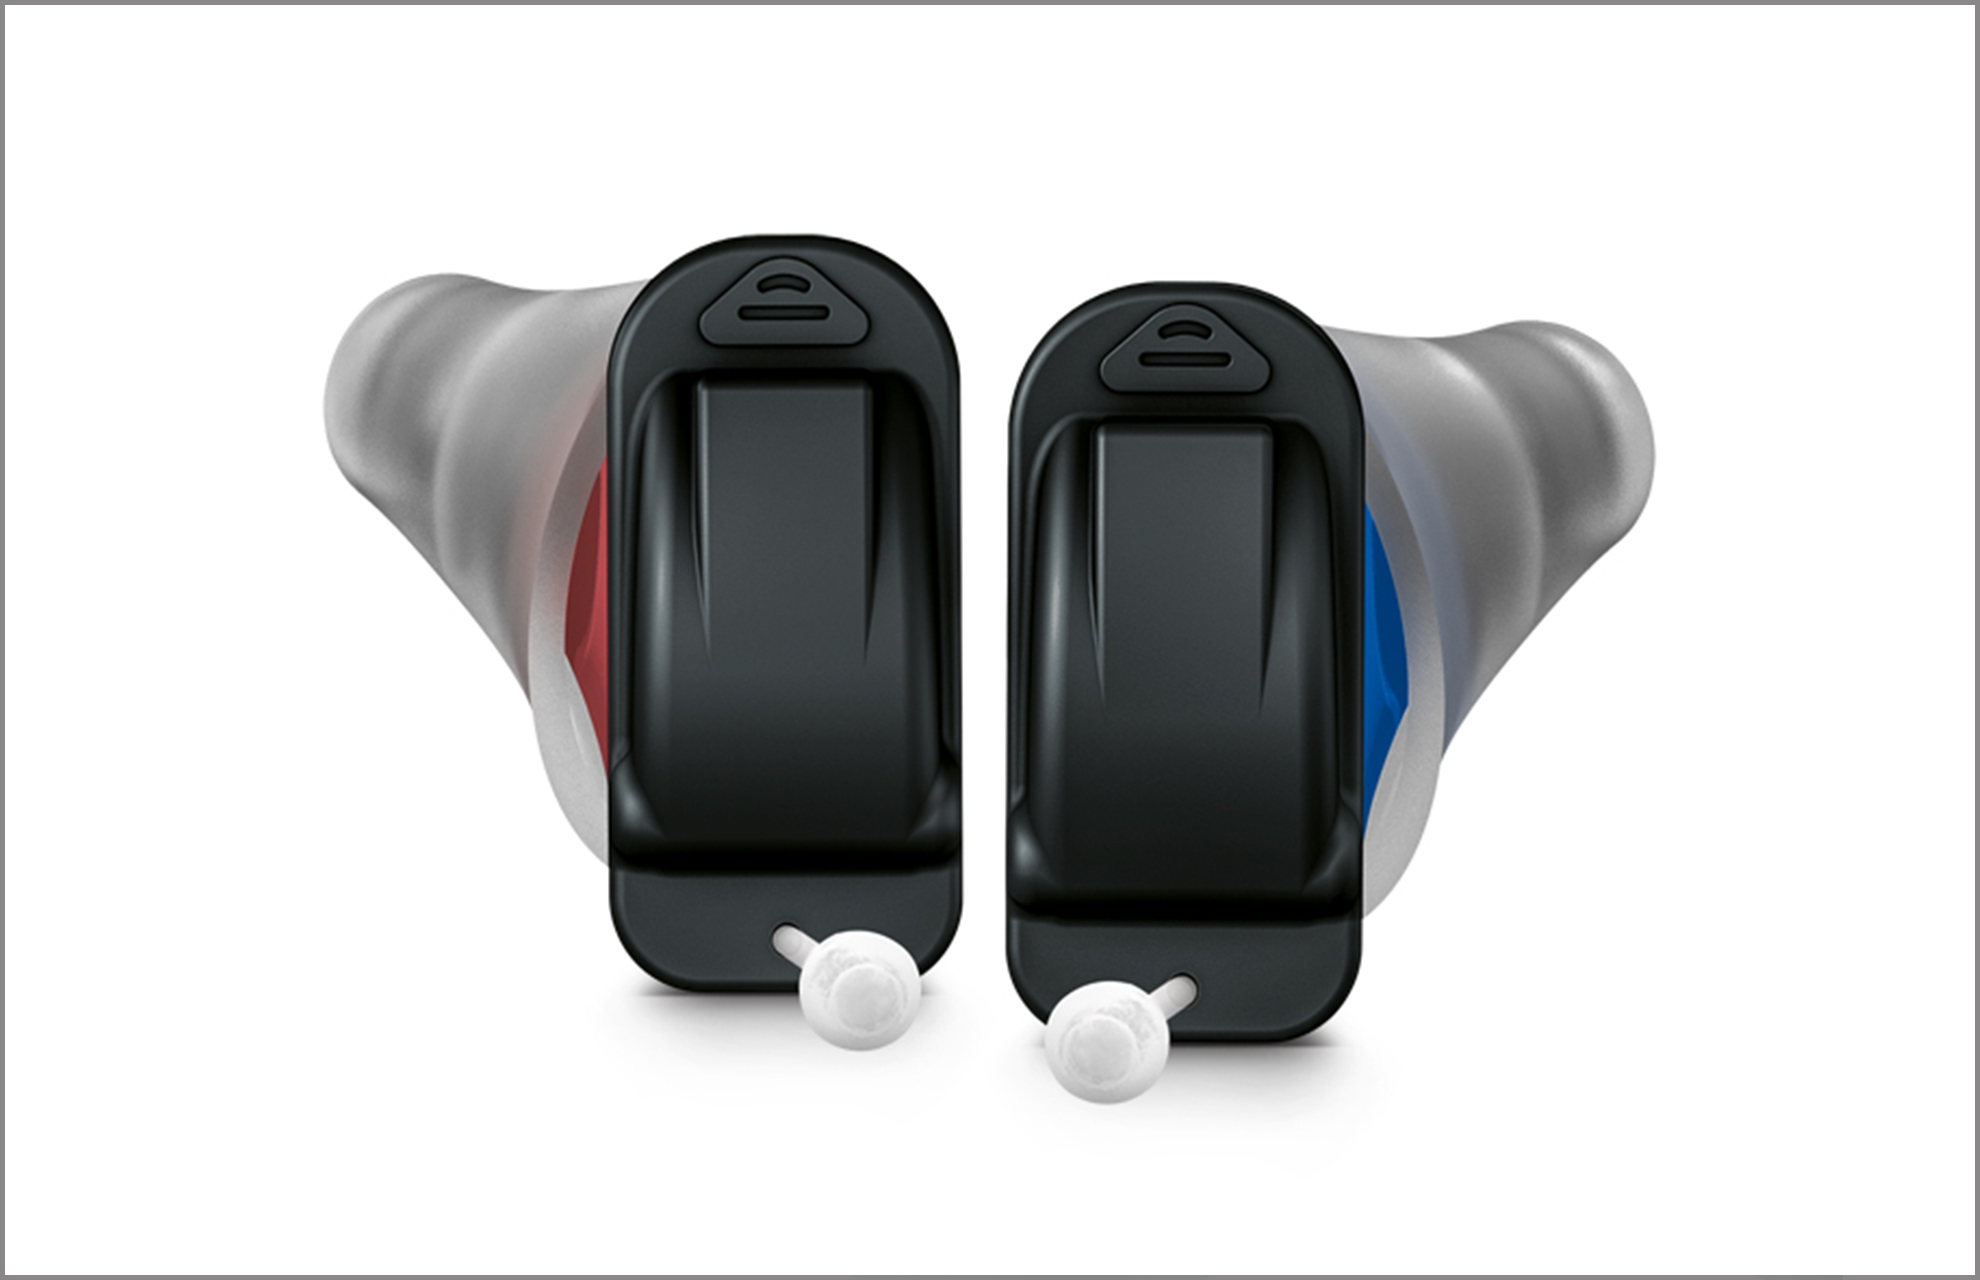 Signia Silk Nx hearing for instant fit and high discretion Sivantos